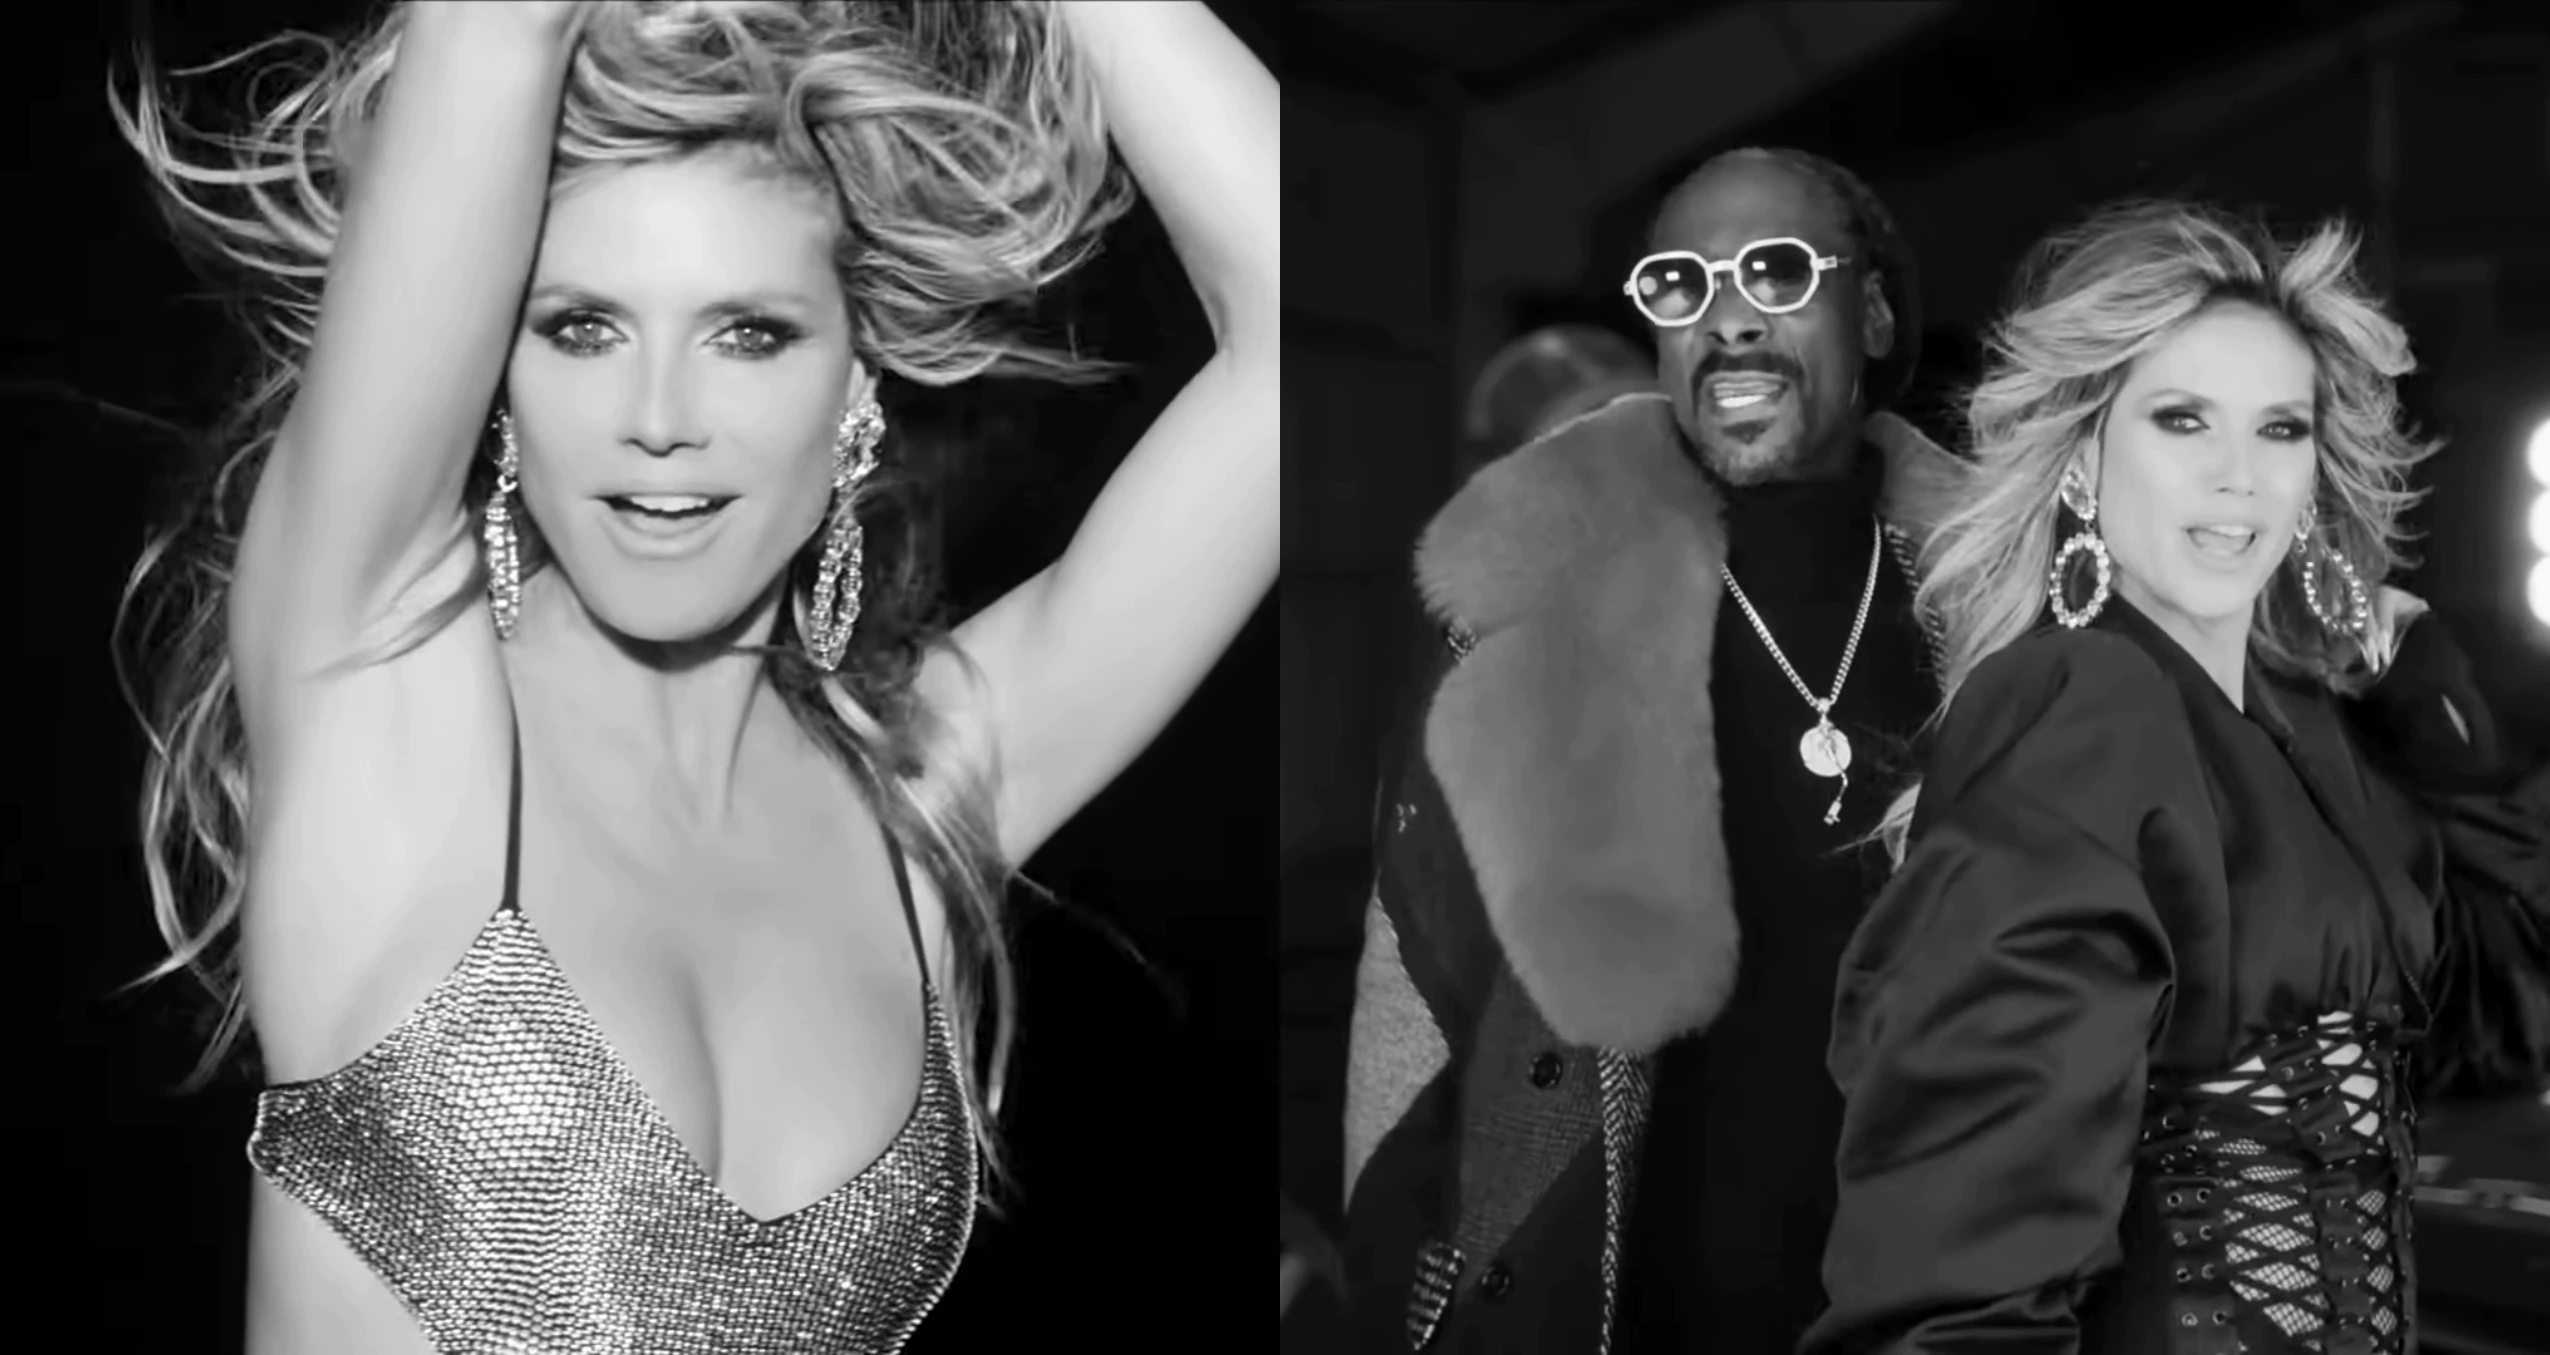 Watch Heidi Klum and Snoop Dogg In New Video for ‘Chai Tea with Heidi’